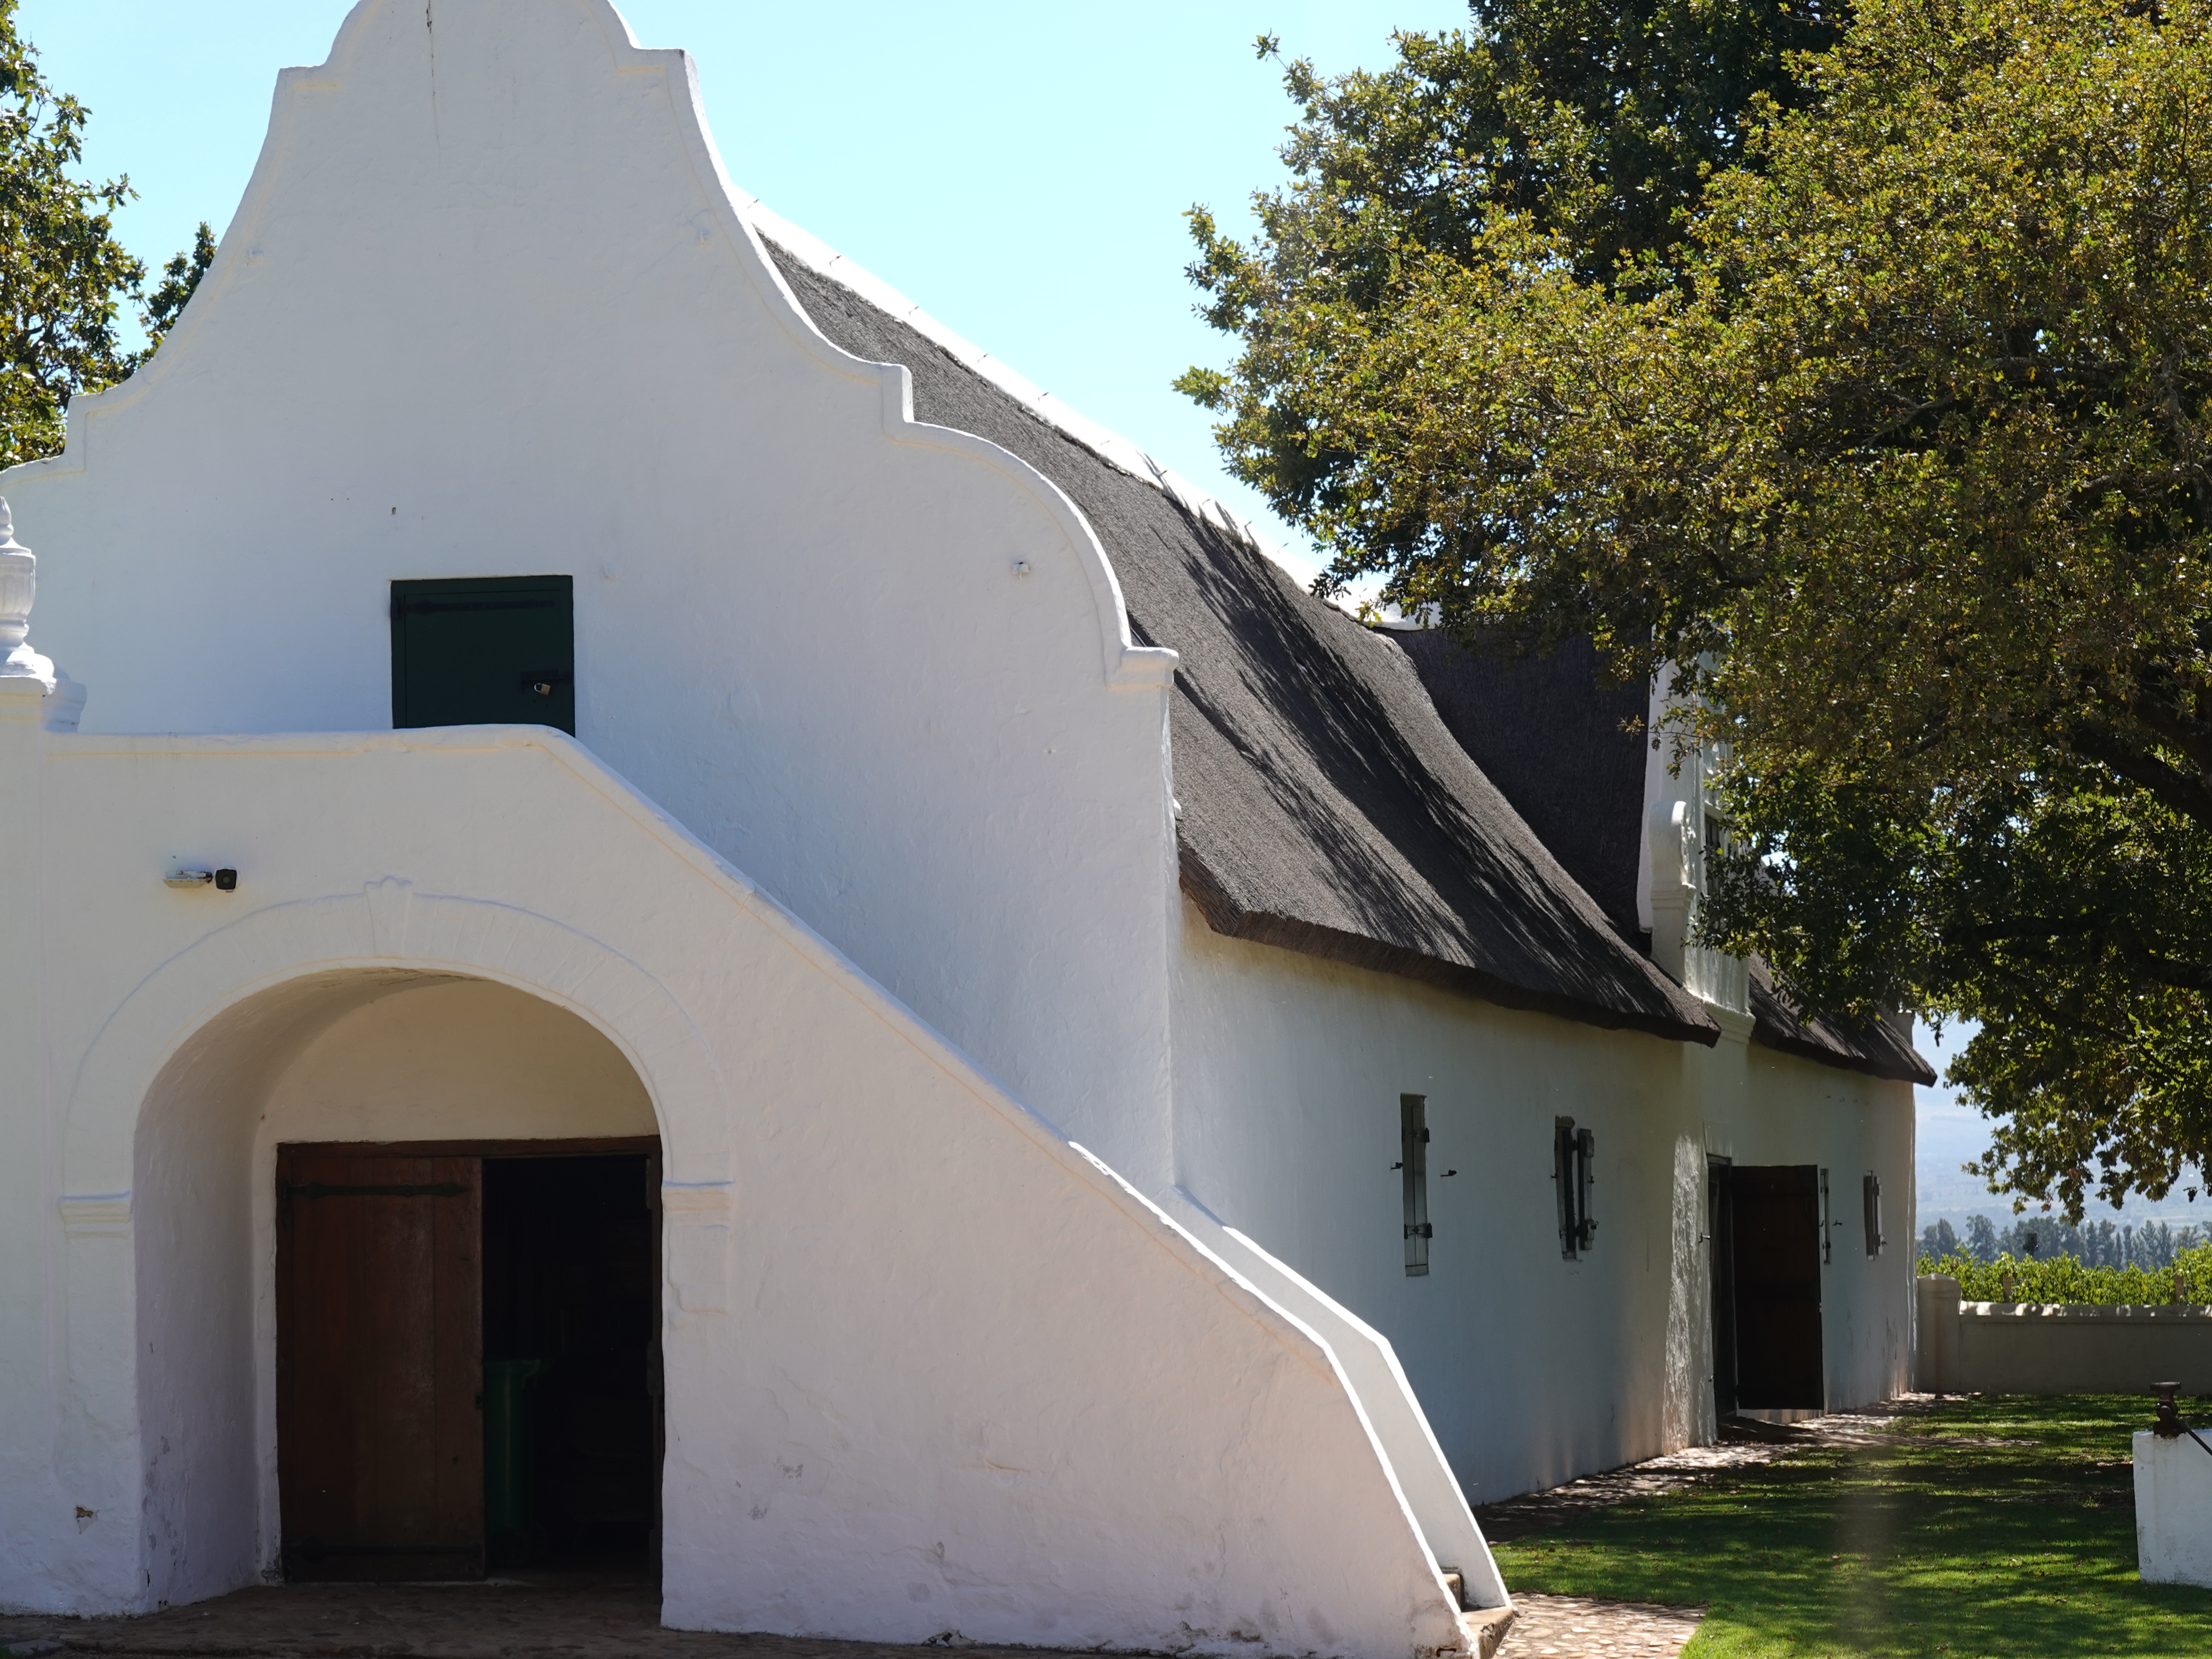 Typical Cape Dutch architecture and white-washed buildings you will see at Babylonstoren